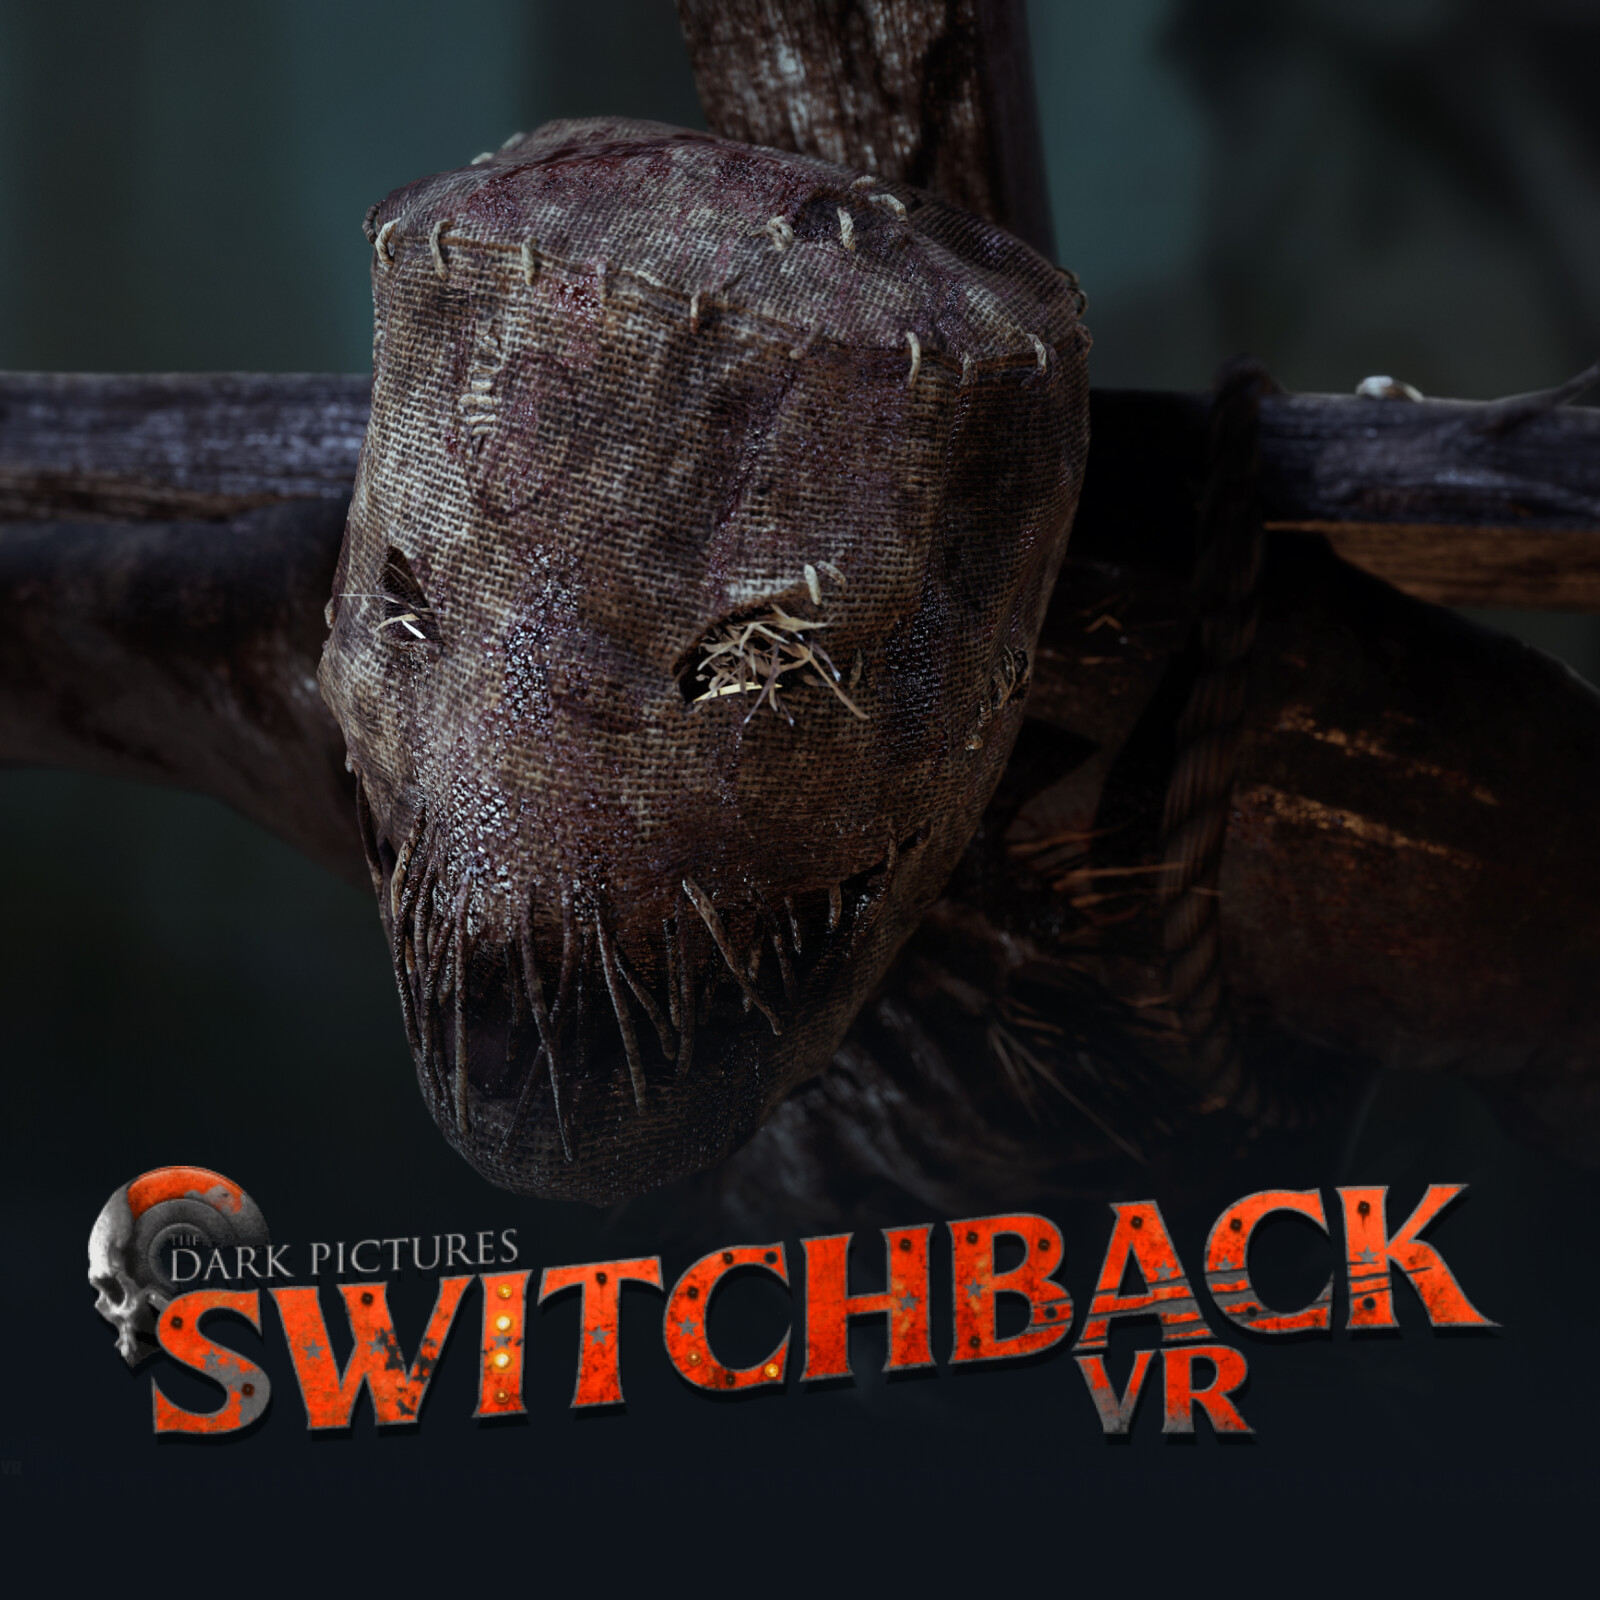 Switchback VR - Scarecrow 02